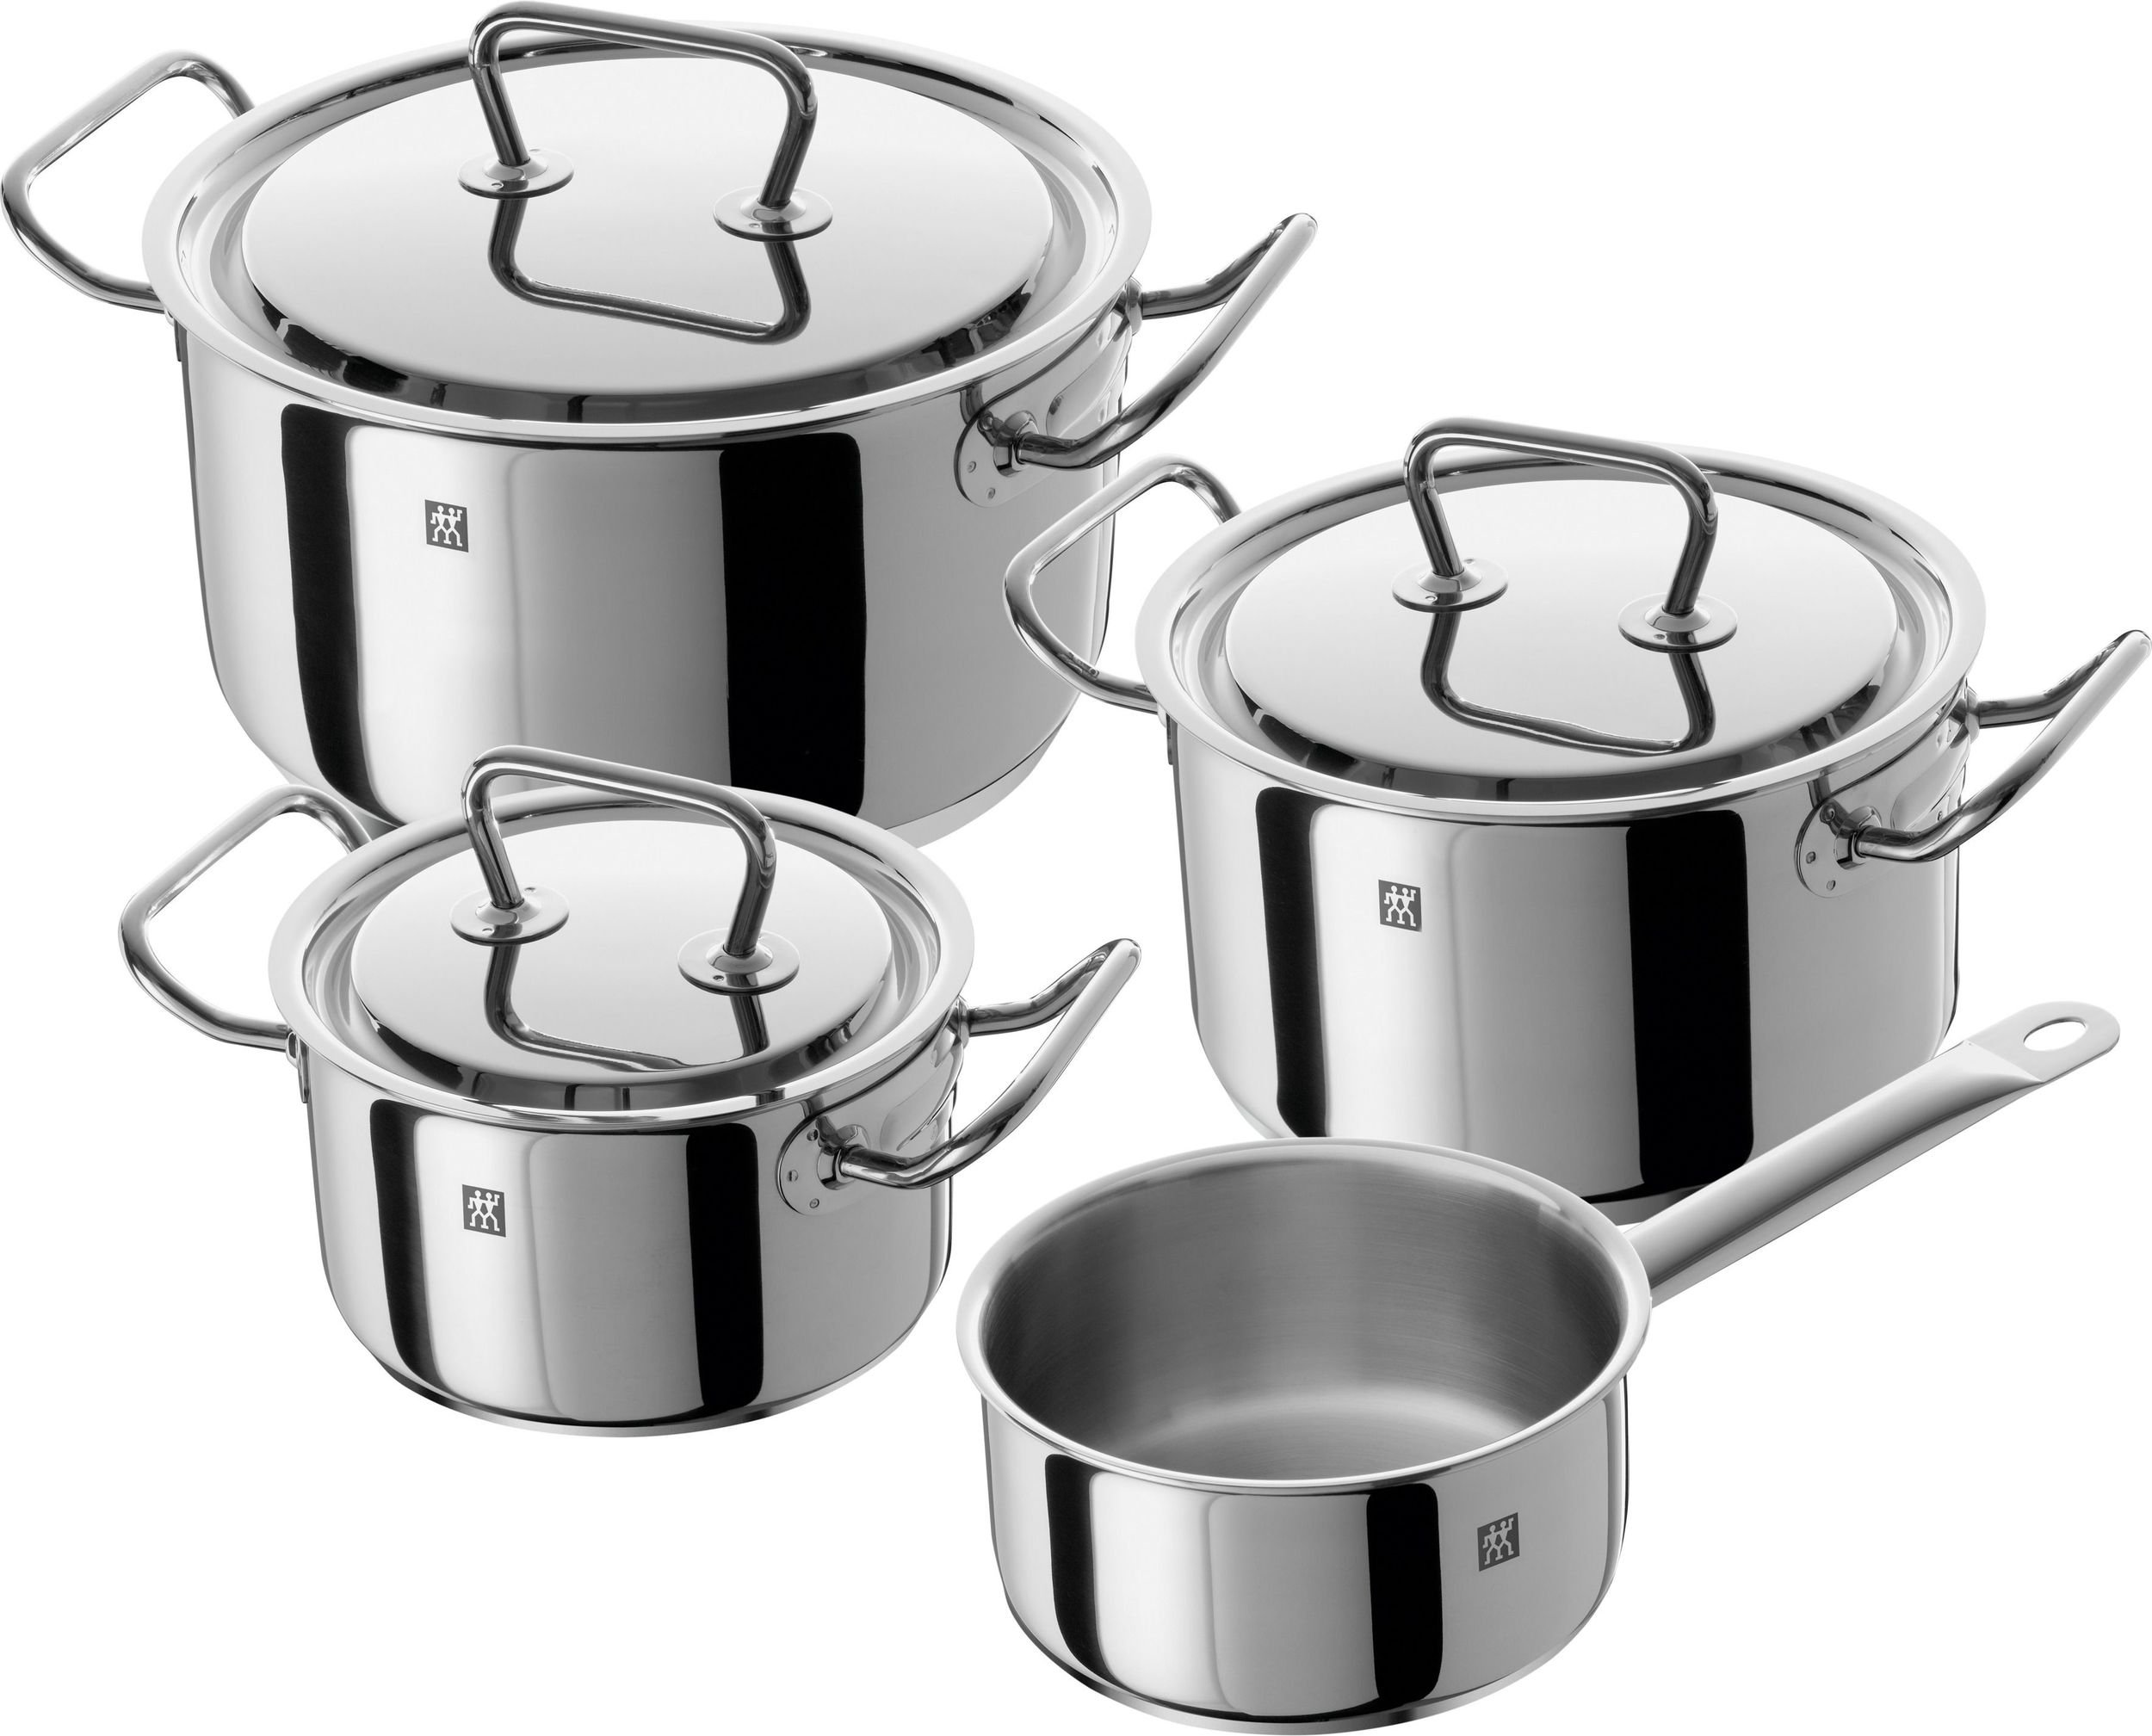 Twin Classic Cooking pcs a with saucepan - Zwilling set pot 5 low